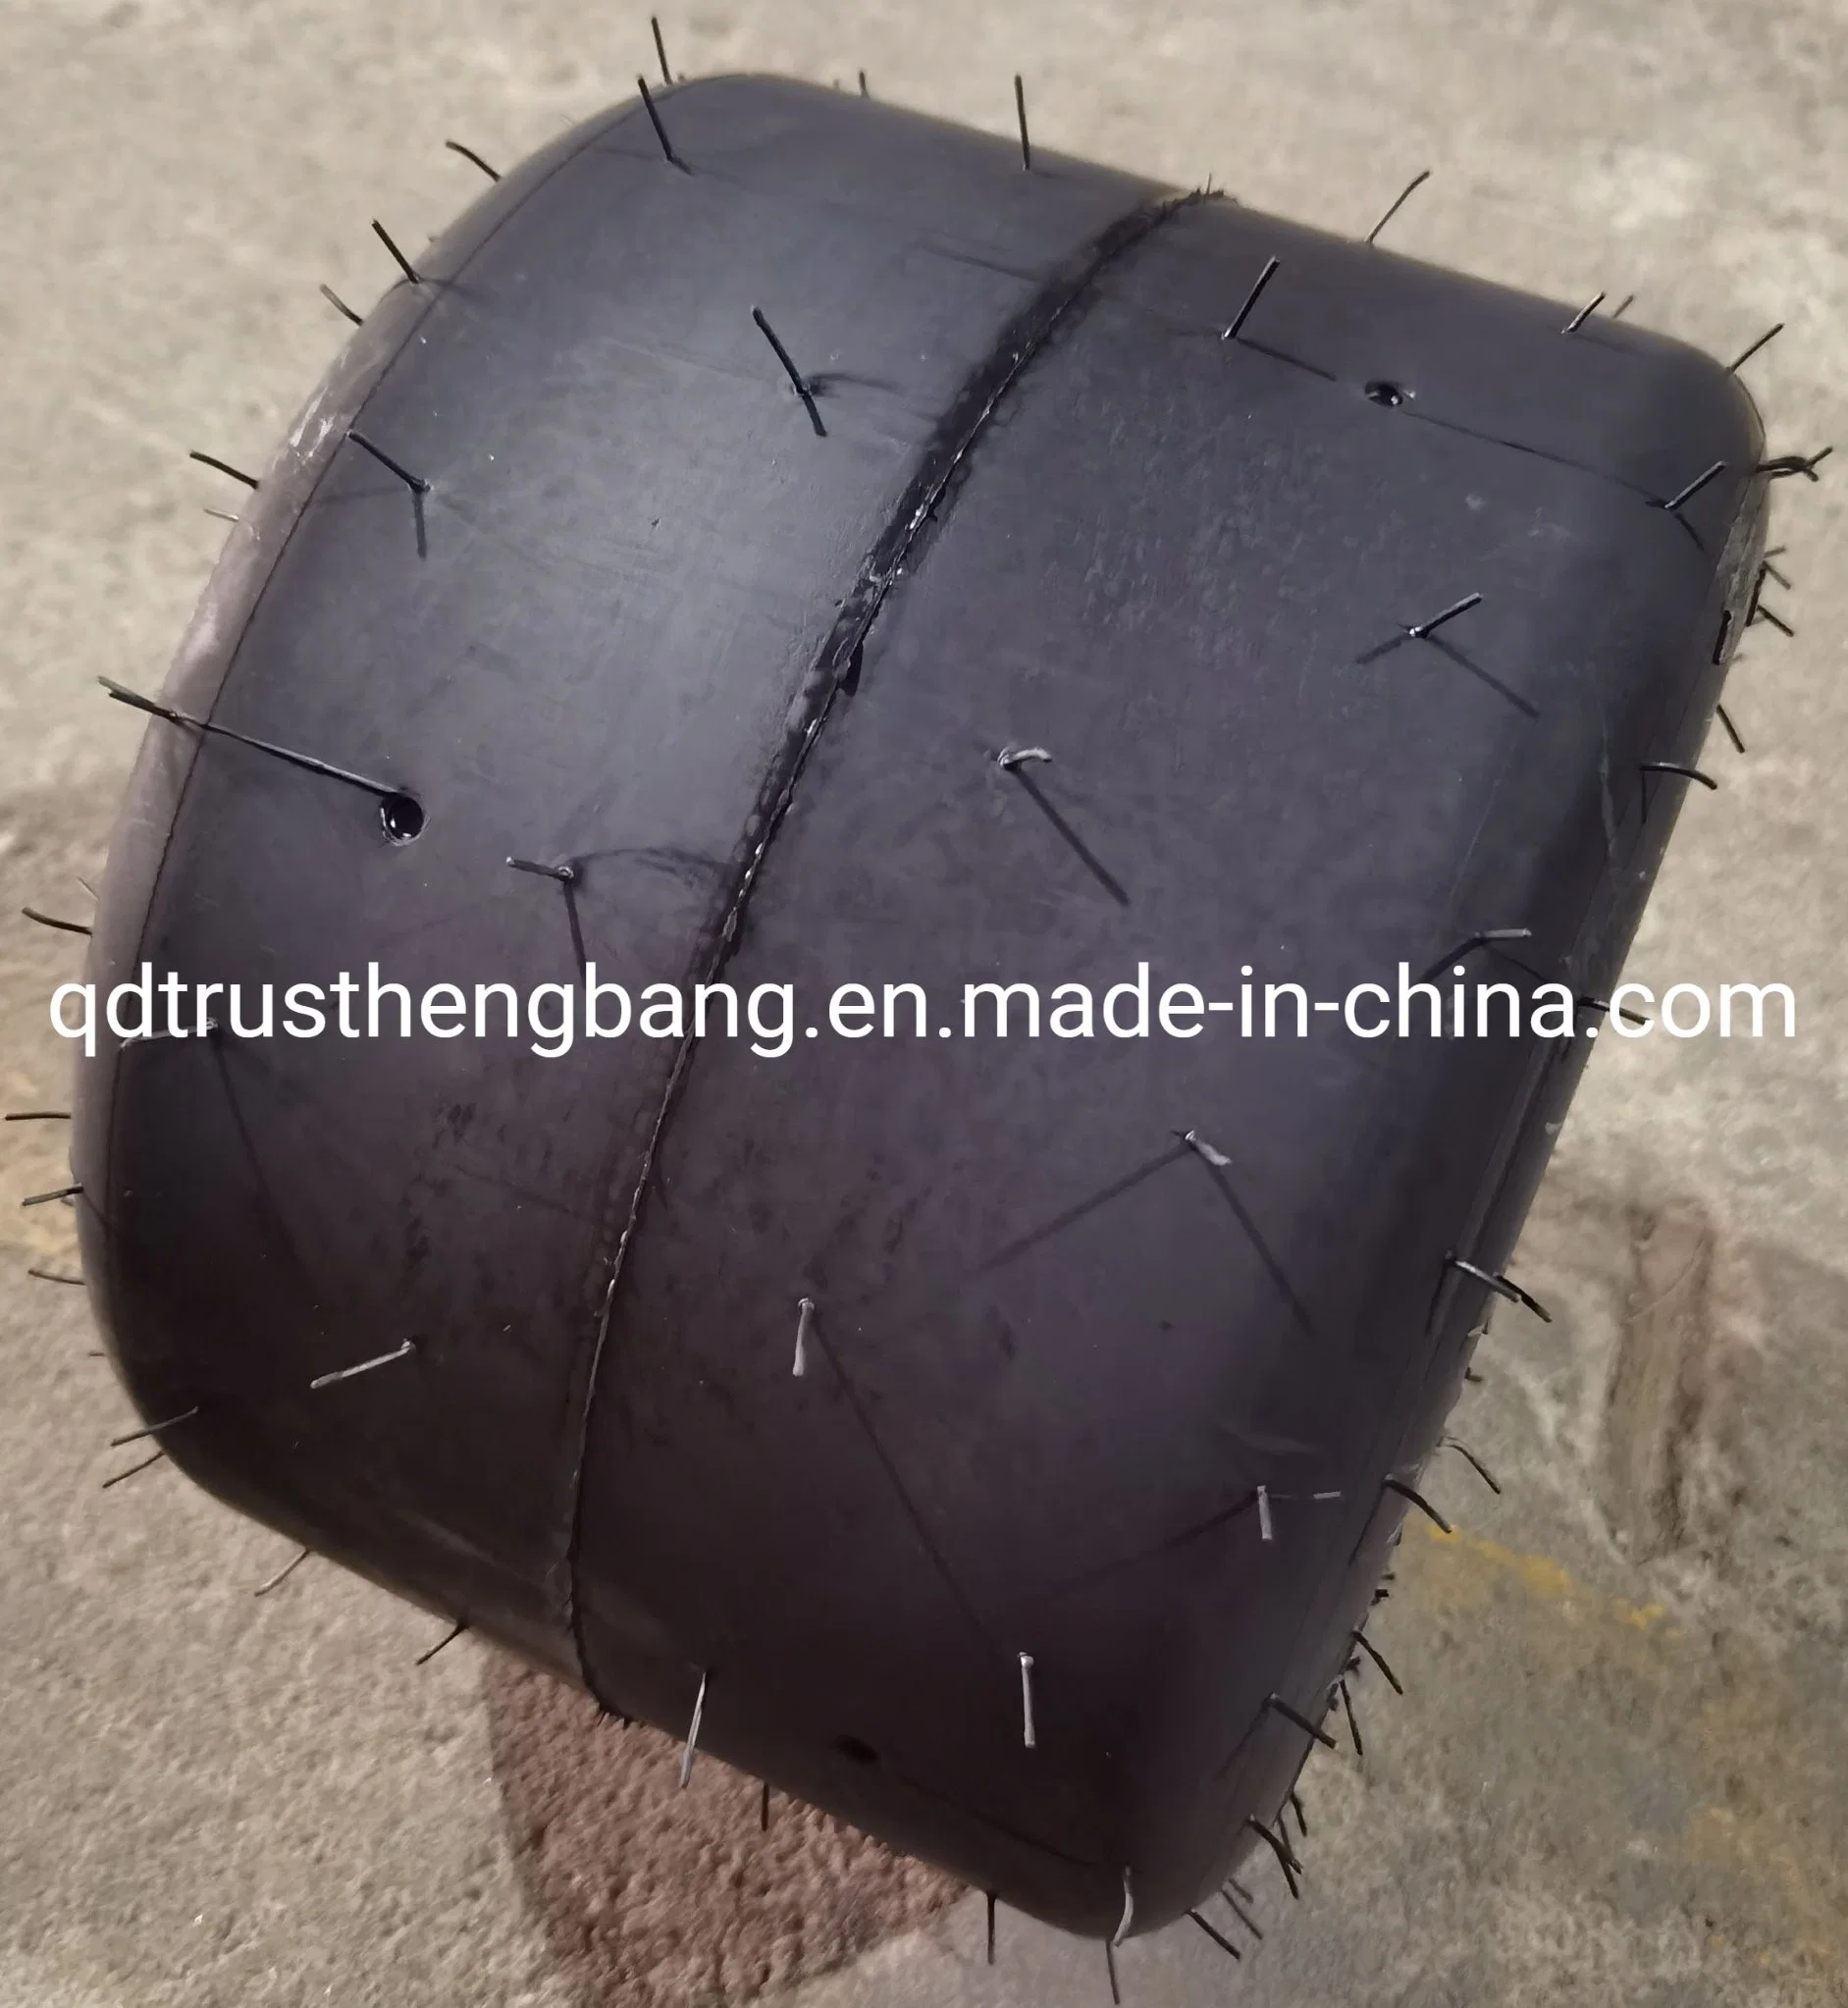 Golf Cart Scooter Motorcycle Trailer ATV Snow Thrower Go Kart Tyre Motorcycle Part Tubeless Rubber Tire